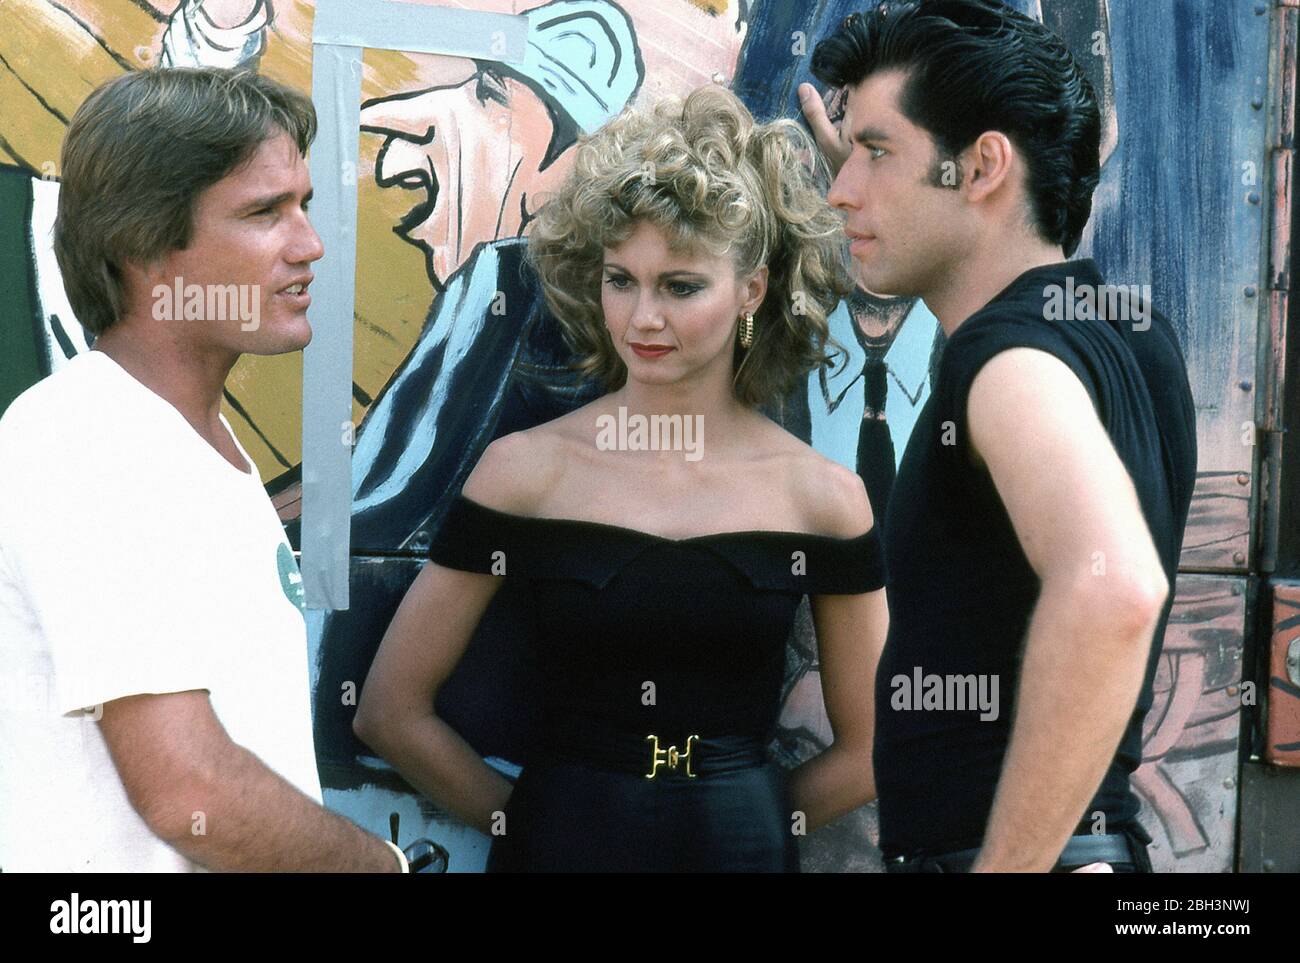 Studio released publicity film still from 'Grease'  Director Randal Kleiser, Olivia Newton-John, John Travolta  © 1978 Paramount Pictures  File Reference # 33962-548THA Stock Photo